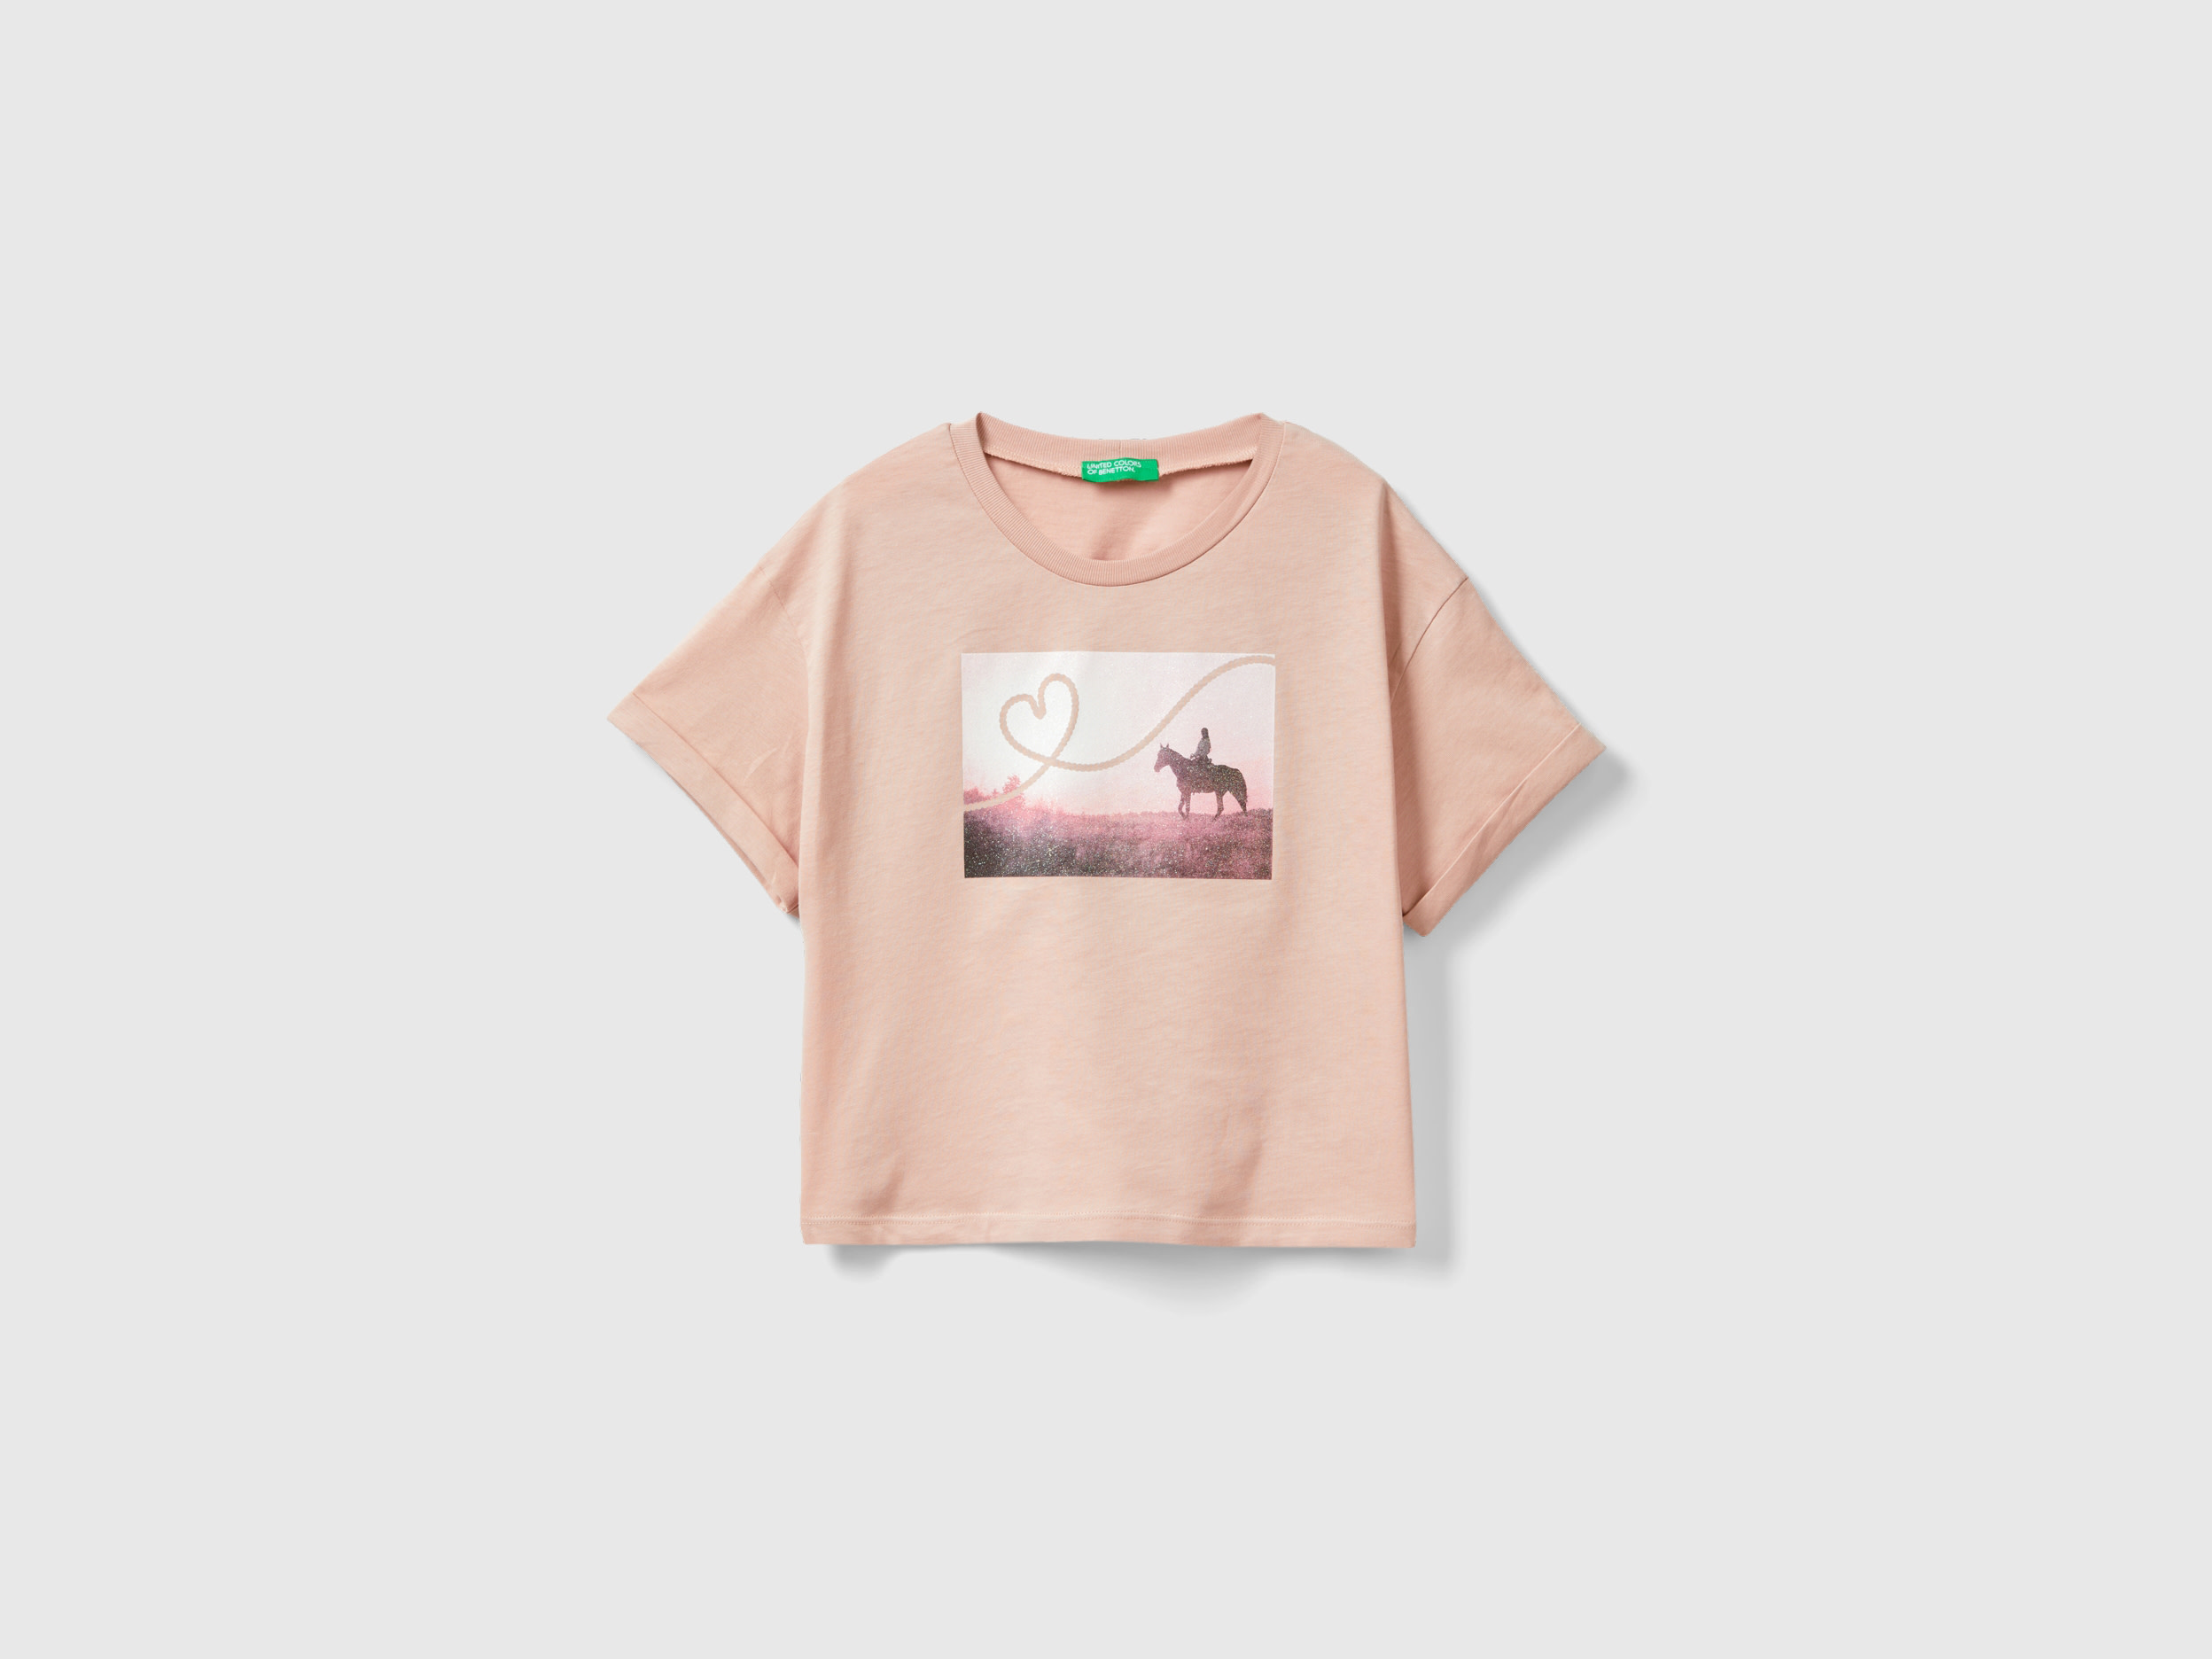 Image of Benetton, T-shirt With Photographic Horse Print, size 3XL, Soft Pink, Kids